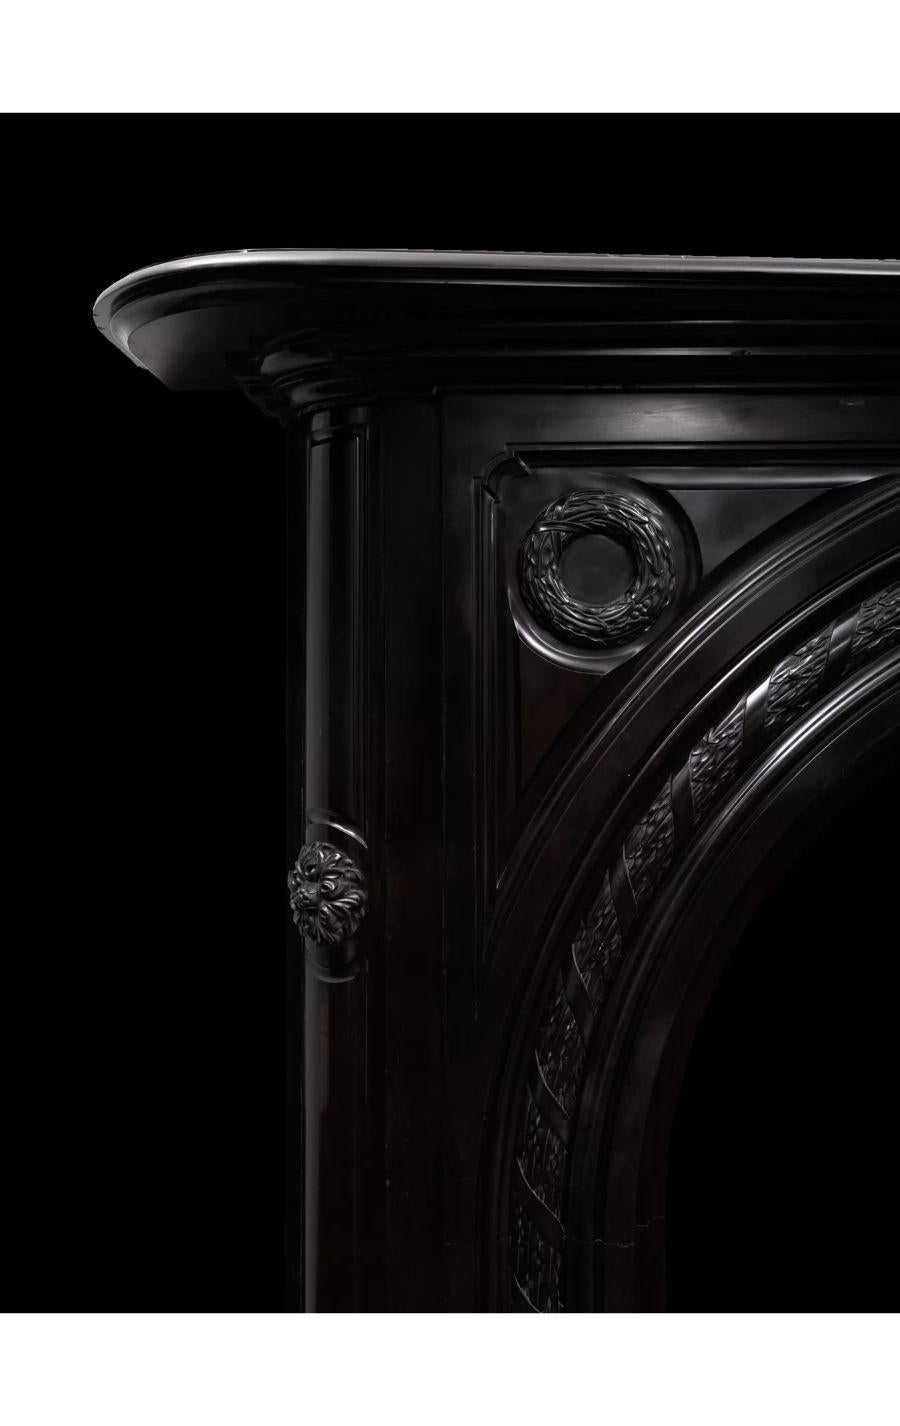 A large antique black marble fire surround from the early Victorian period.

A sizable serpentine shaped mantelpiece with moulded edges, curves forward over the keystone. The recessed panelled keystone connects two arches, these are beautifully